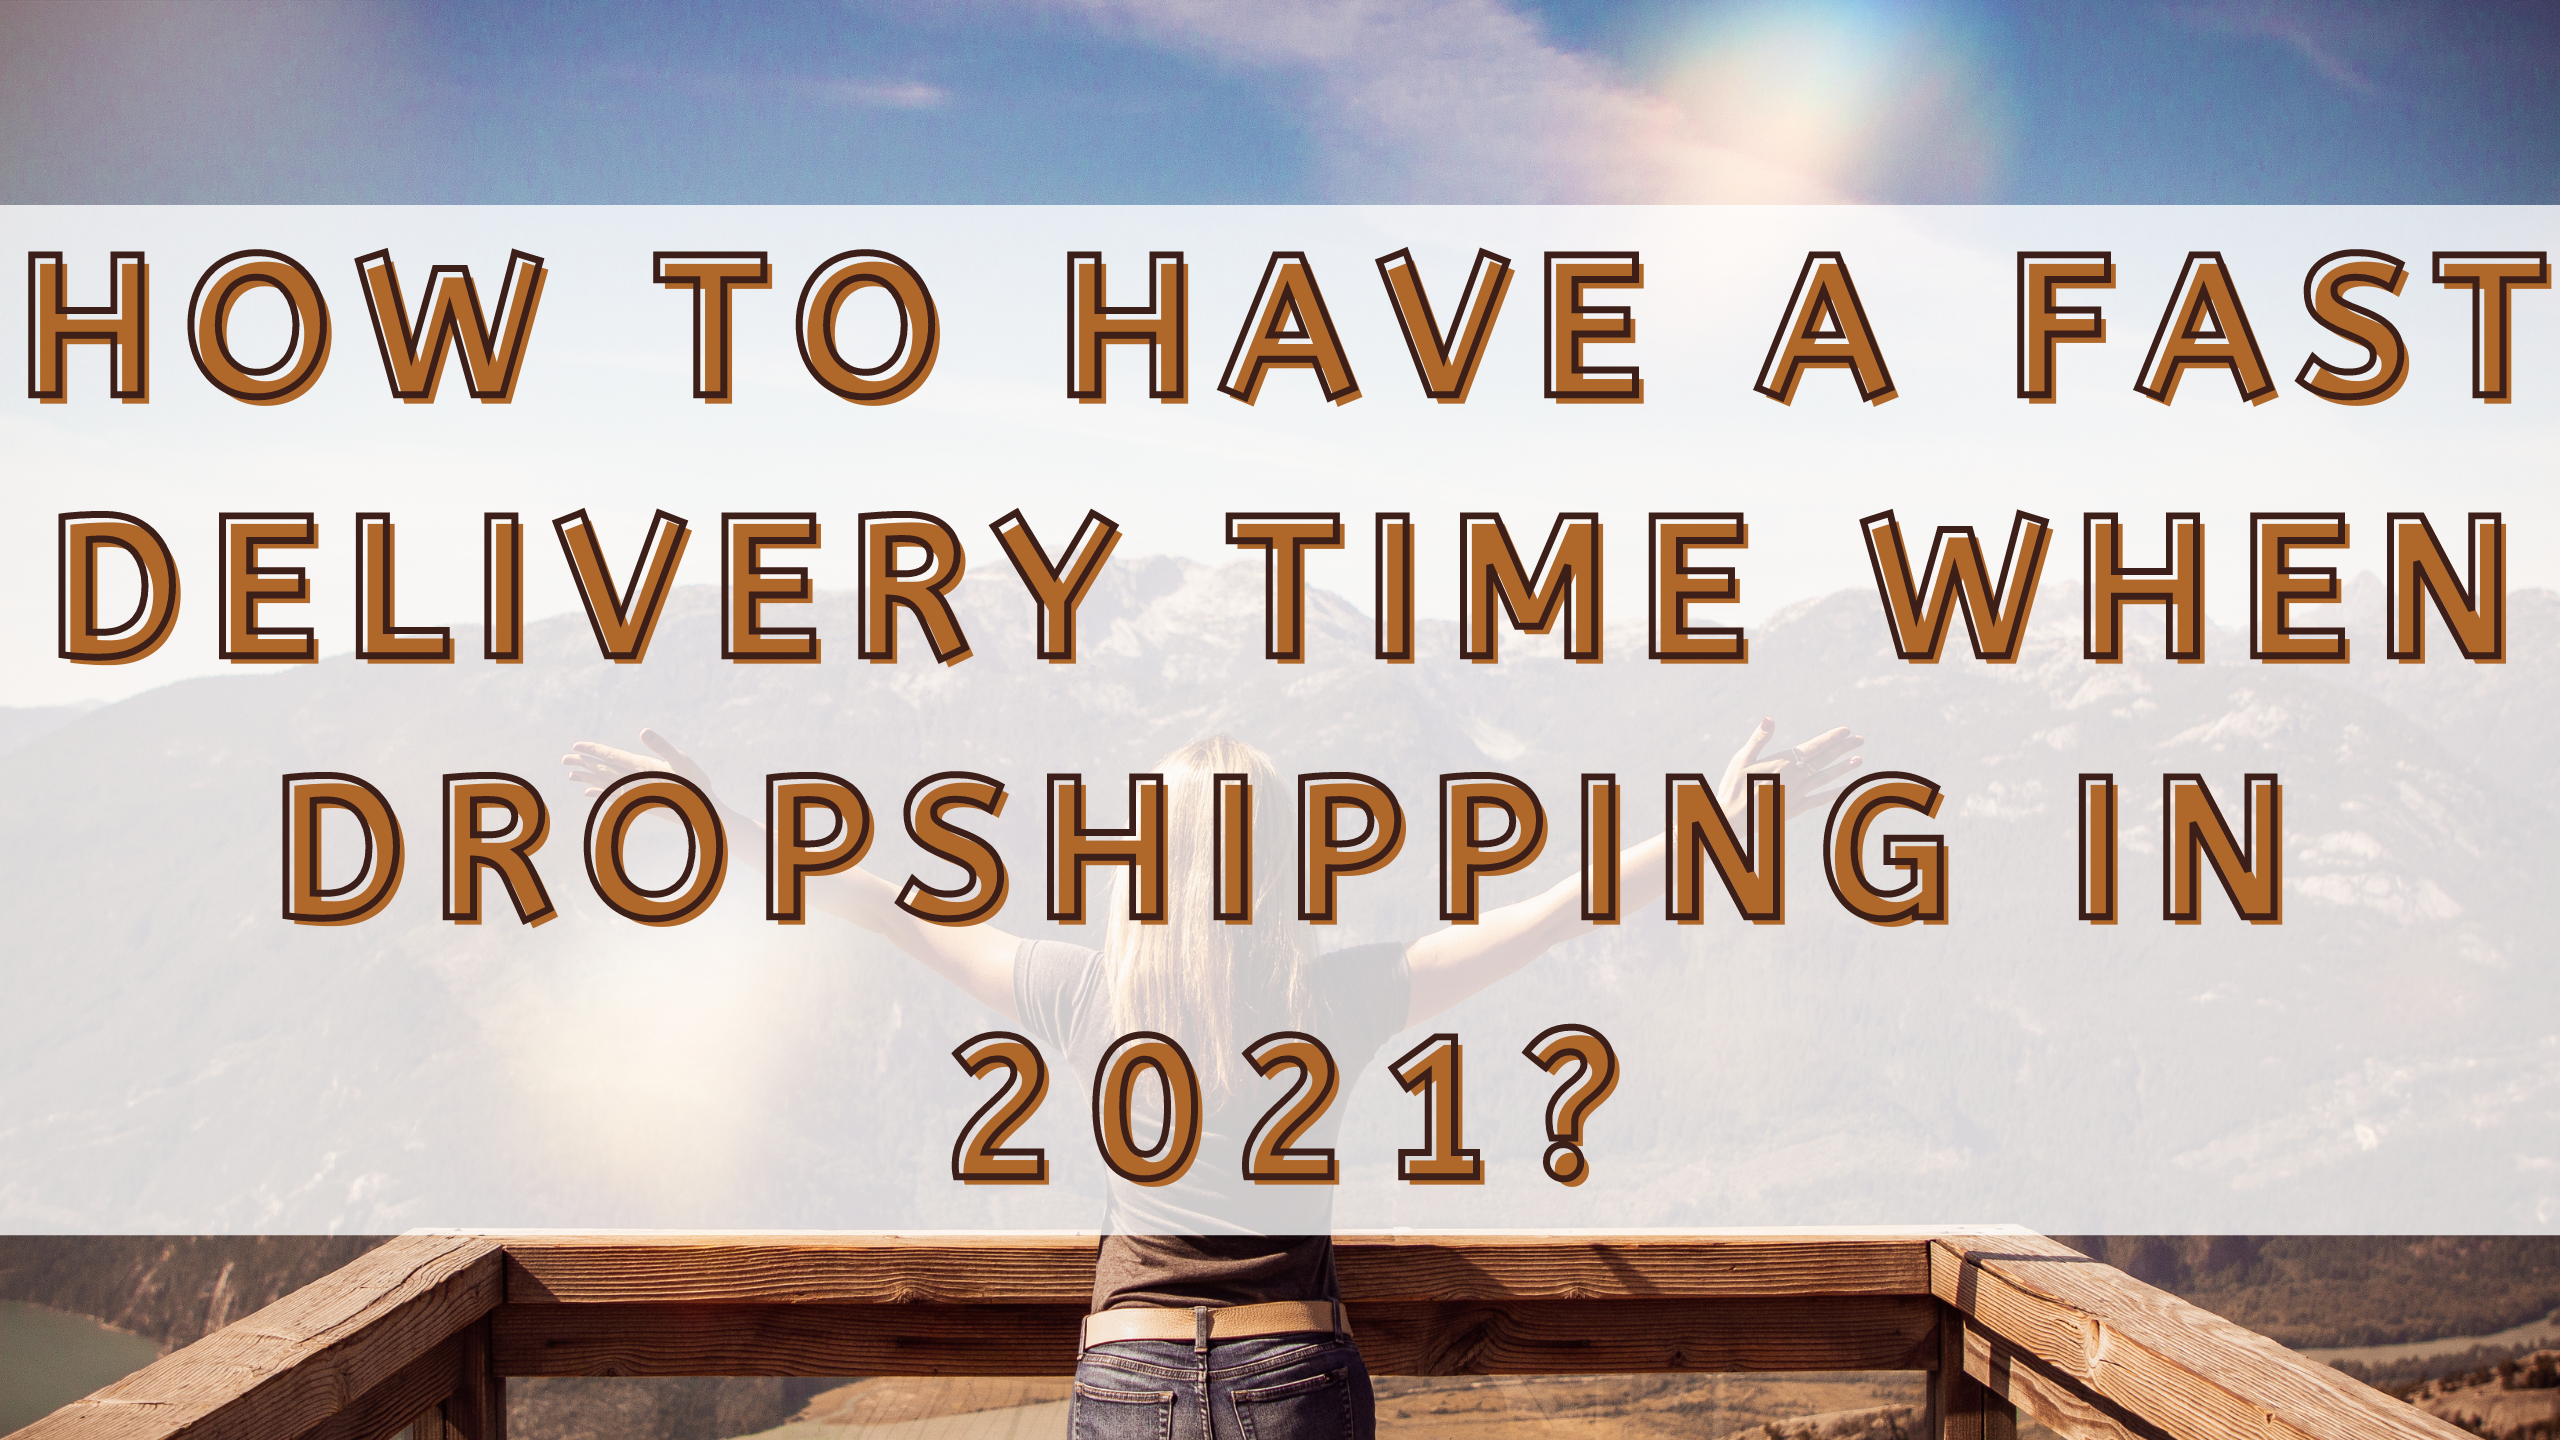 How to Have a Fast Delivery Time When Dropshipping in 2021?